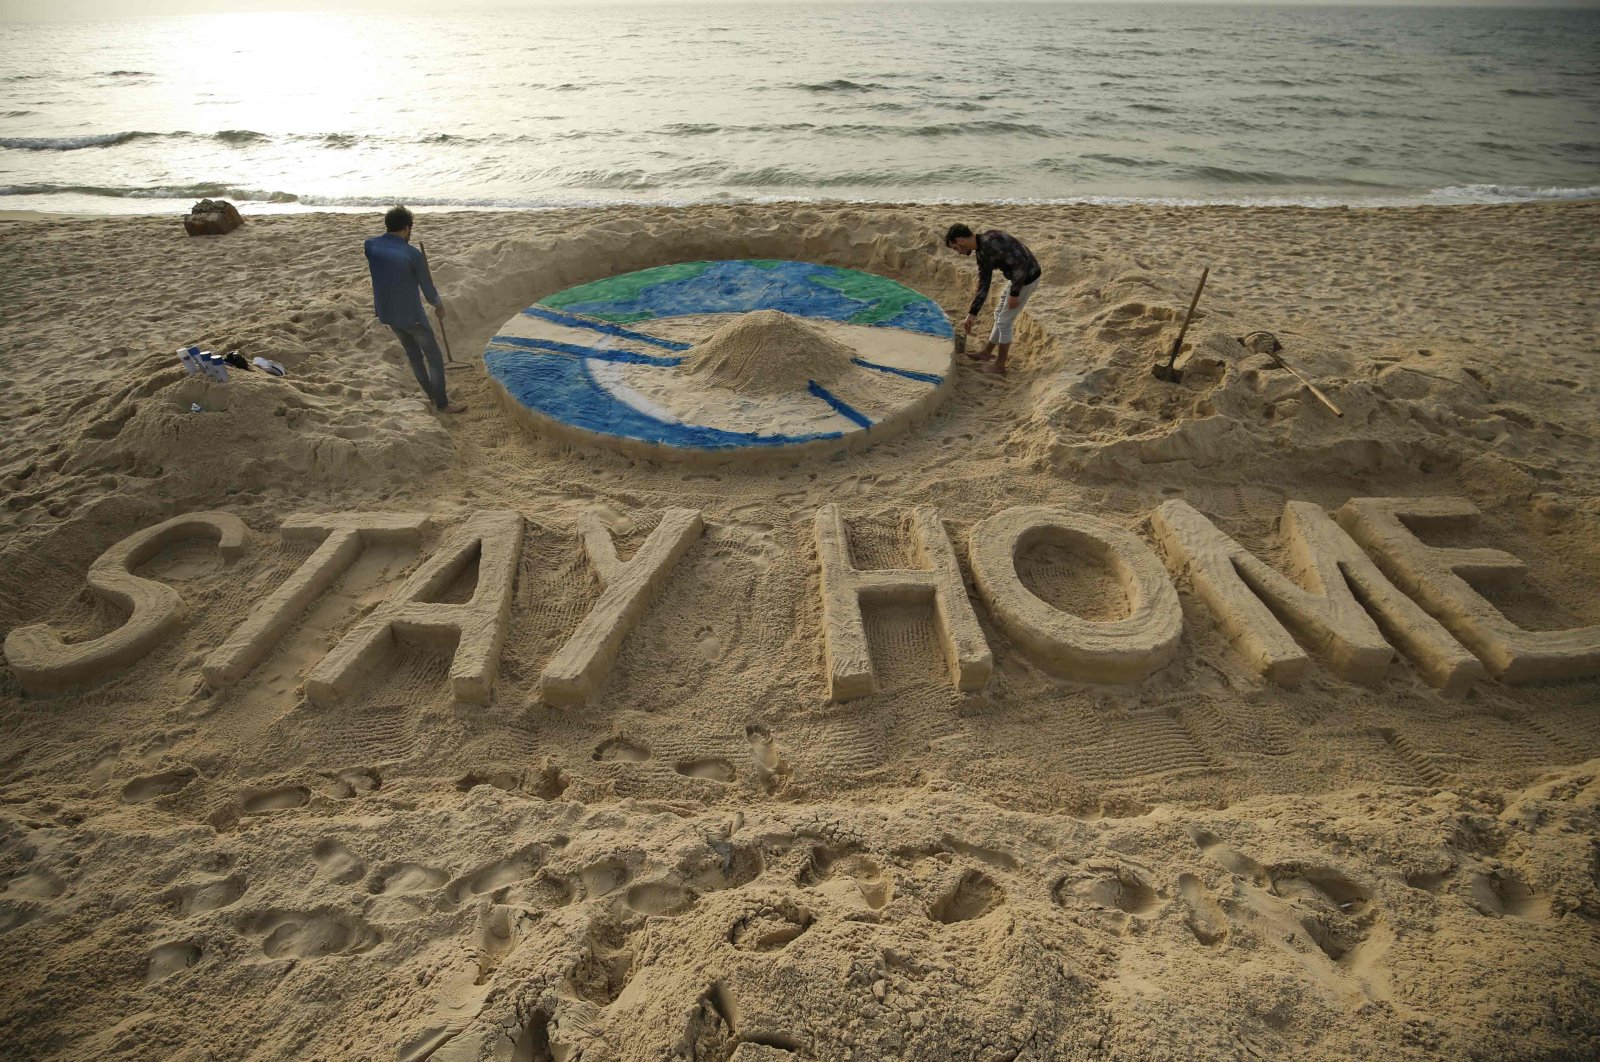 Palestinian artists work on a sand sculpture depicting the earth with a message reading "Stay Home" along a beach in Gaza City during the COVID-19 coronavirus pandemic, Tuesday, March 31, 2020. (AFP Photo)